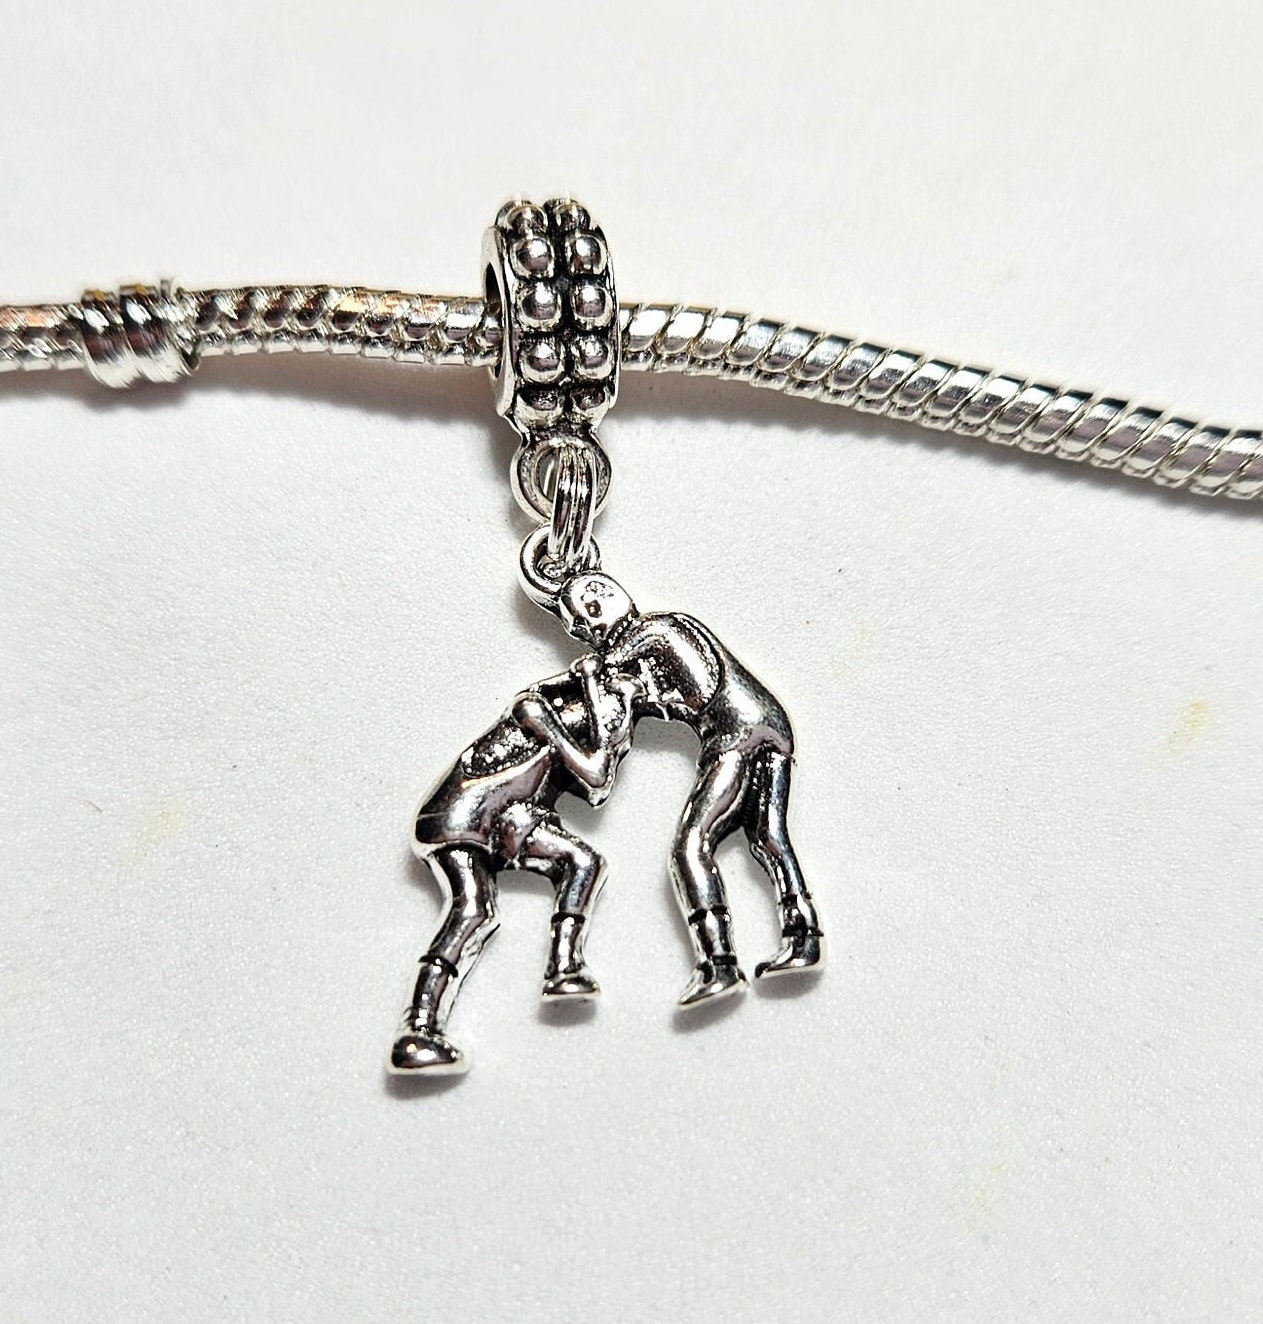 Shop For Cute Wholesale wrestling charms That Are Trendy And